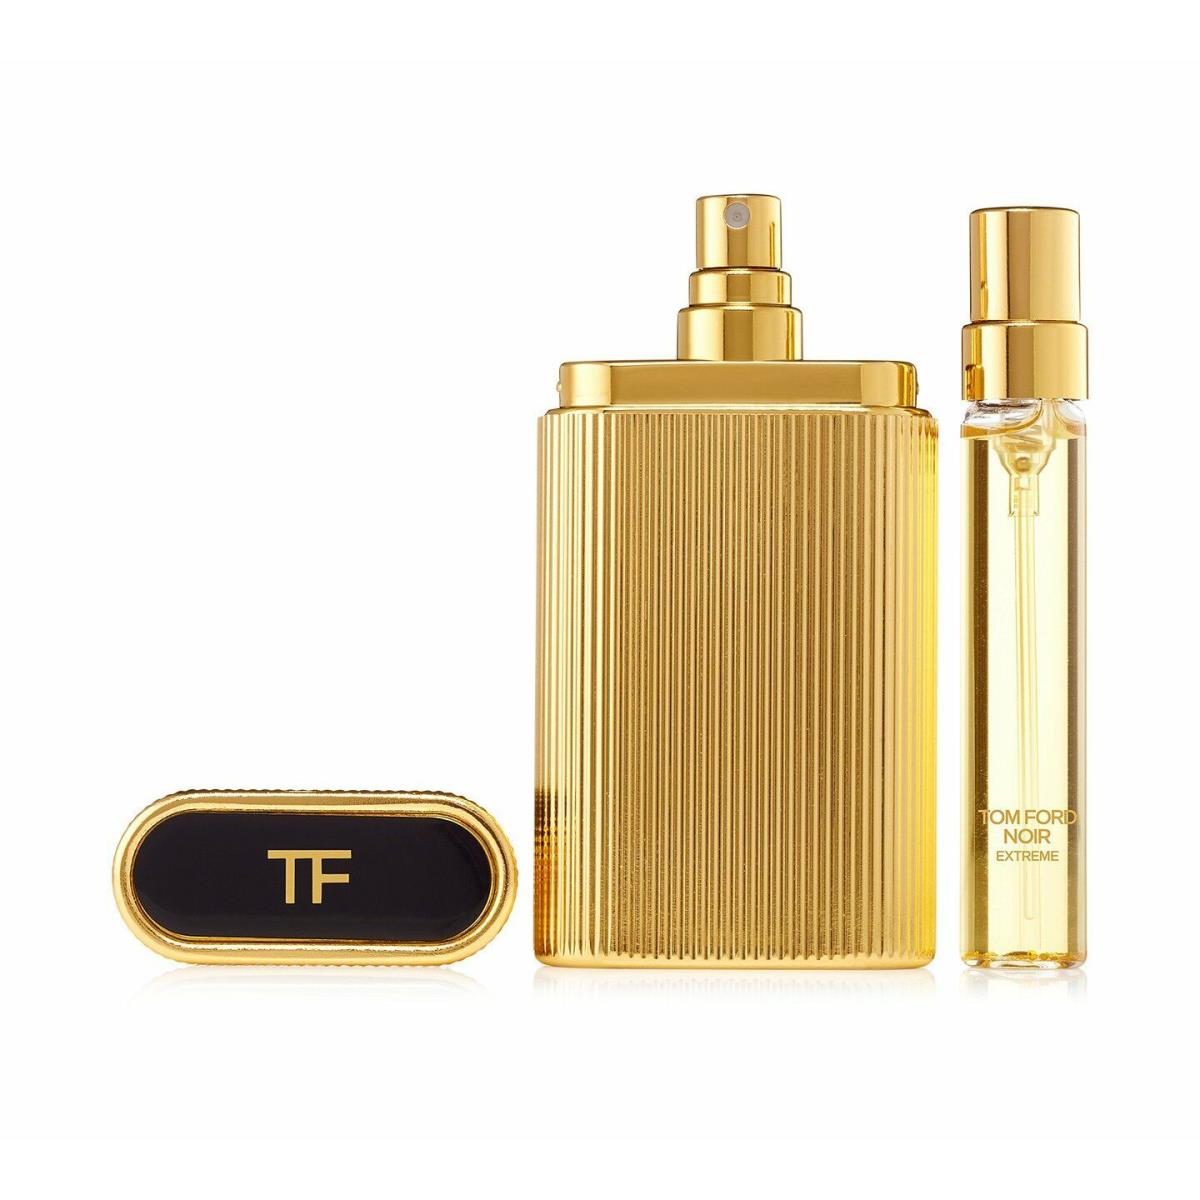 Tom Ford Extreme Perfume Atomizer Pcs Gift - Tom Ford perfume,cologne,fragrance,parfum - 888066060455 | Fash Brands